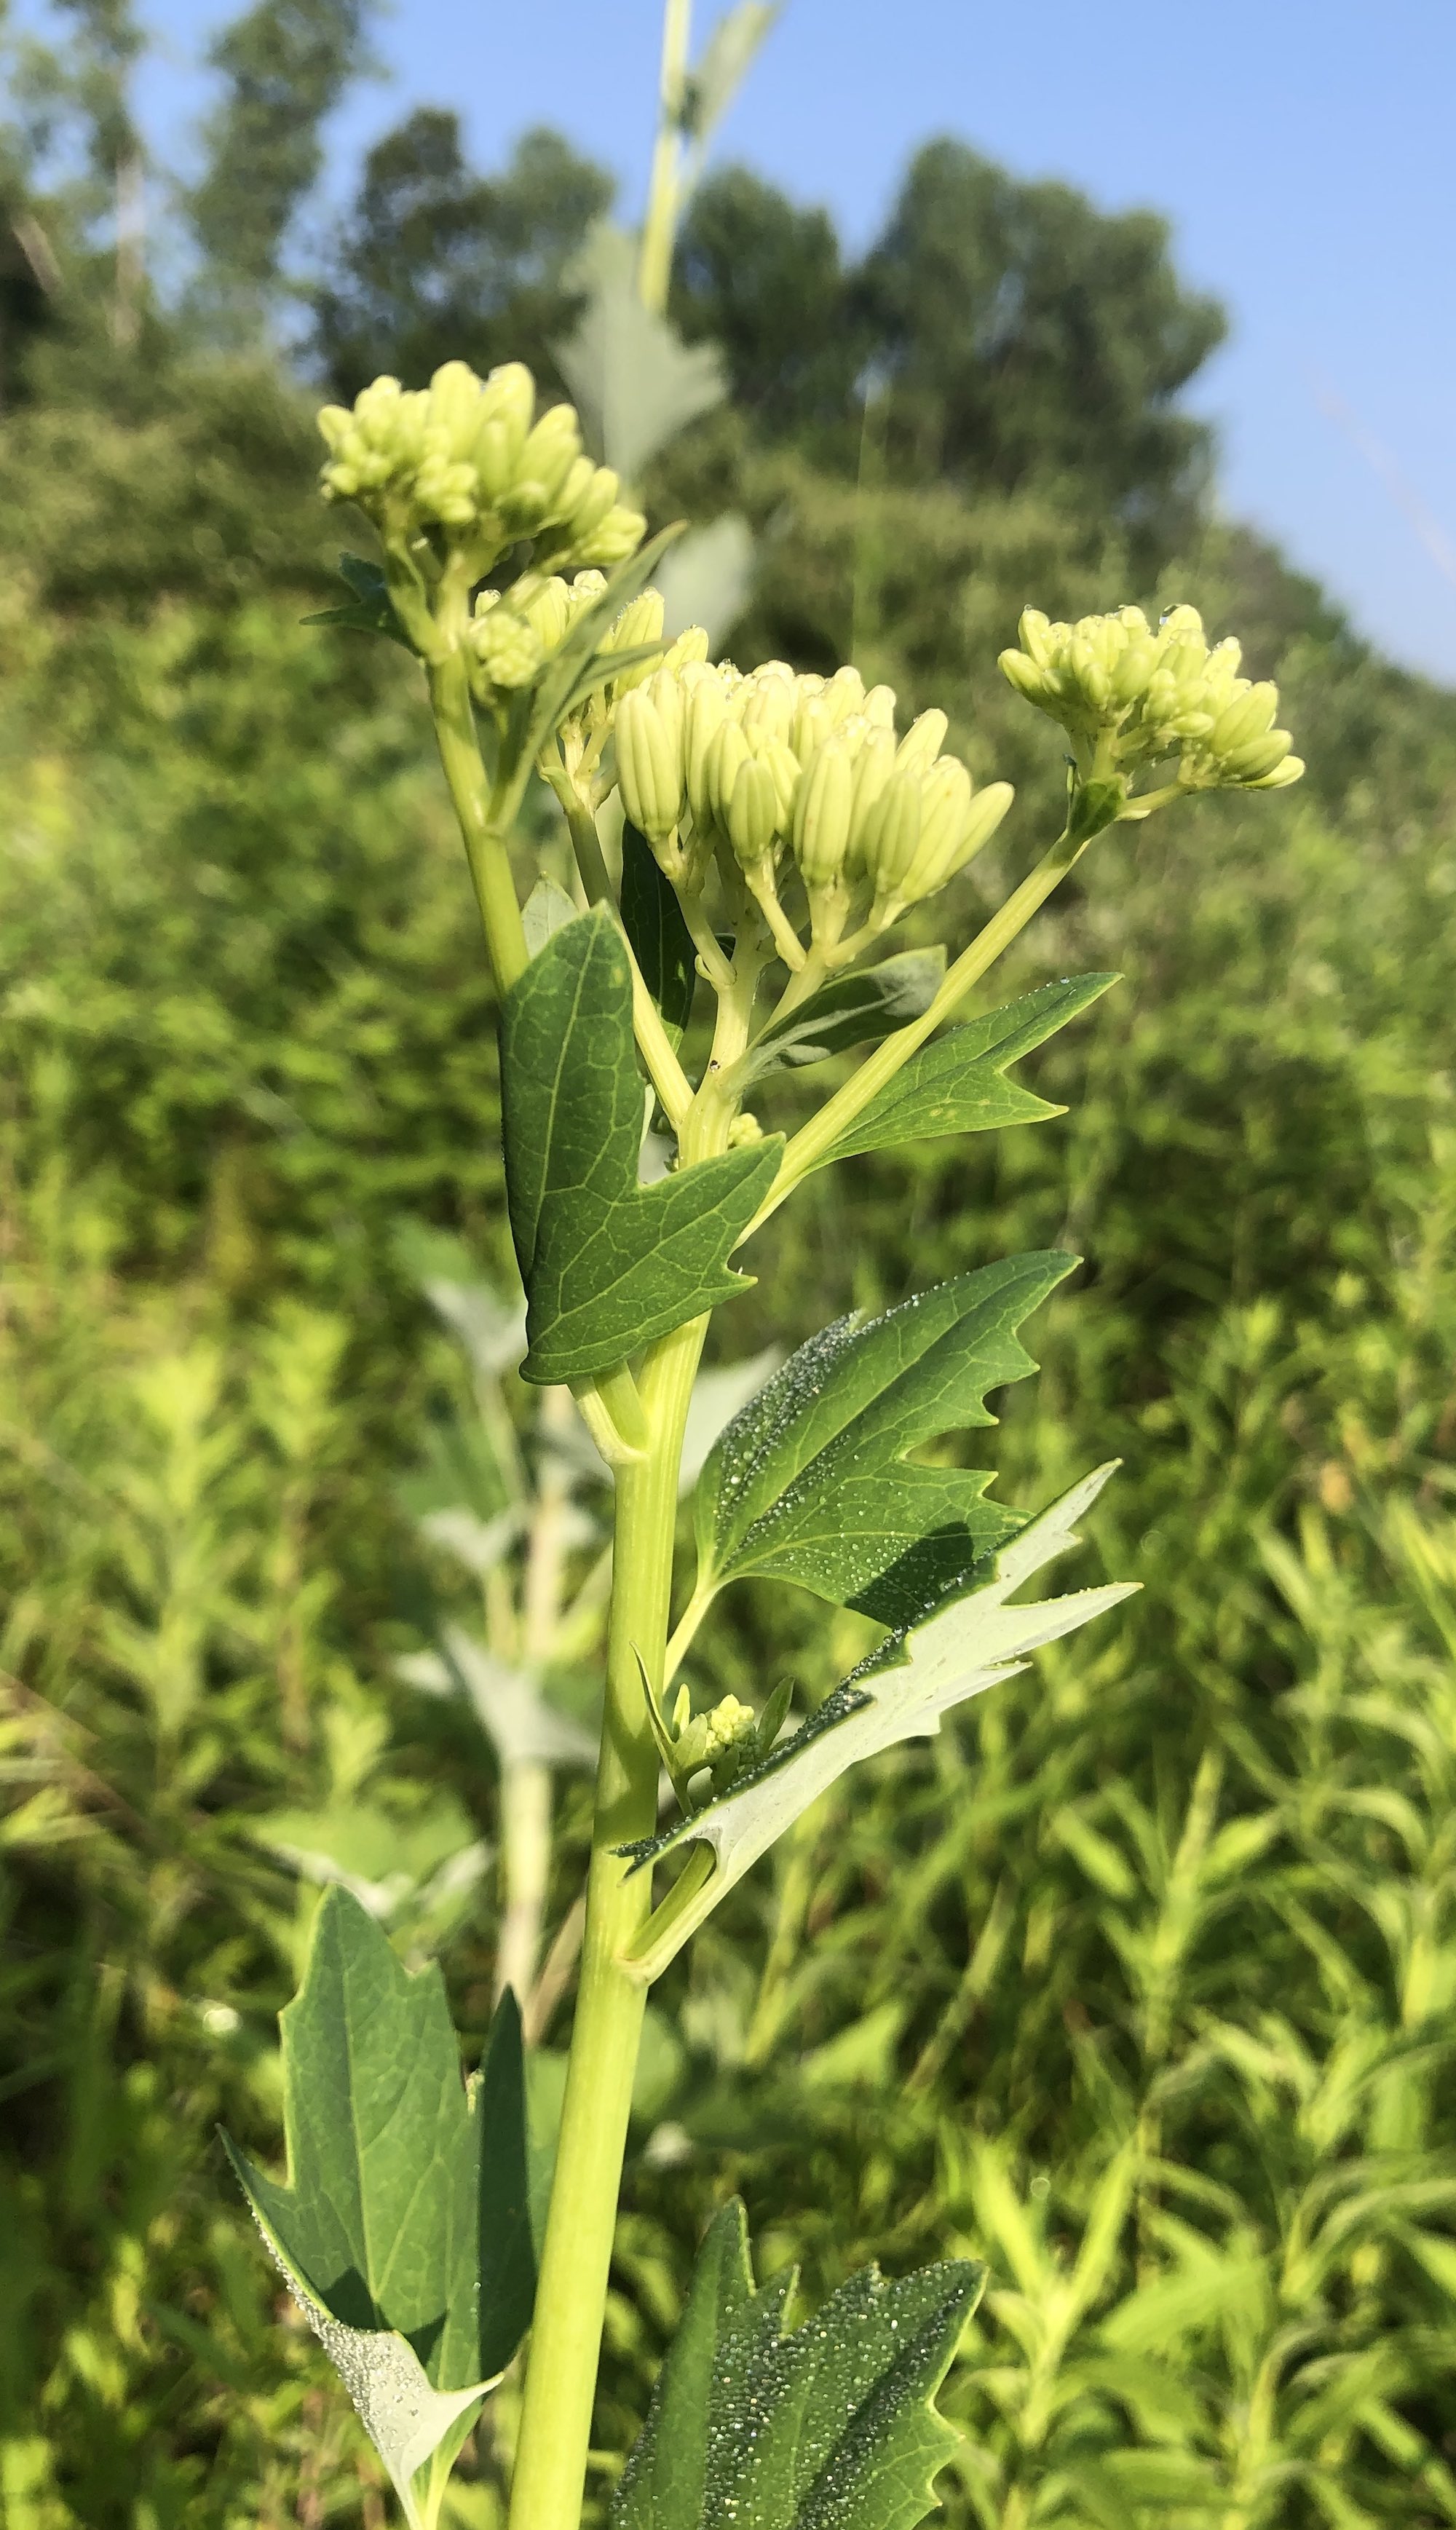 Pale Indian Plantain in Marion Dunn Prairie in Madison, Wisconsin on July 8, 2019.